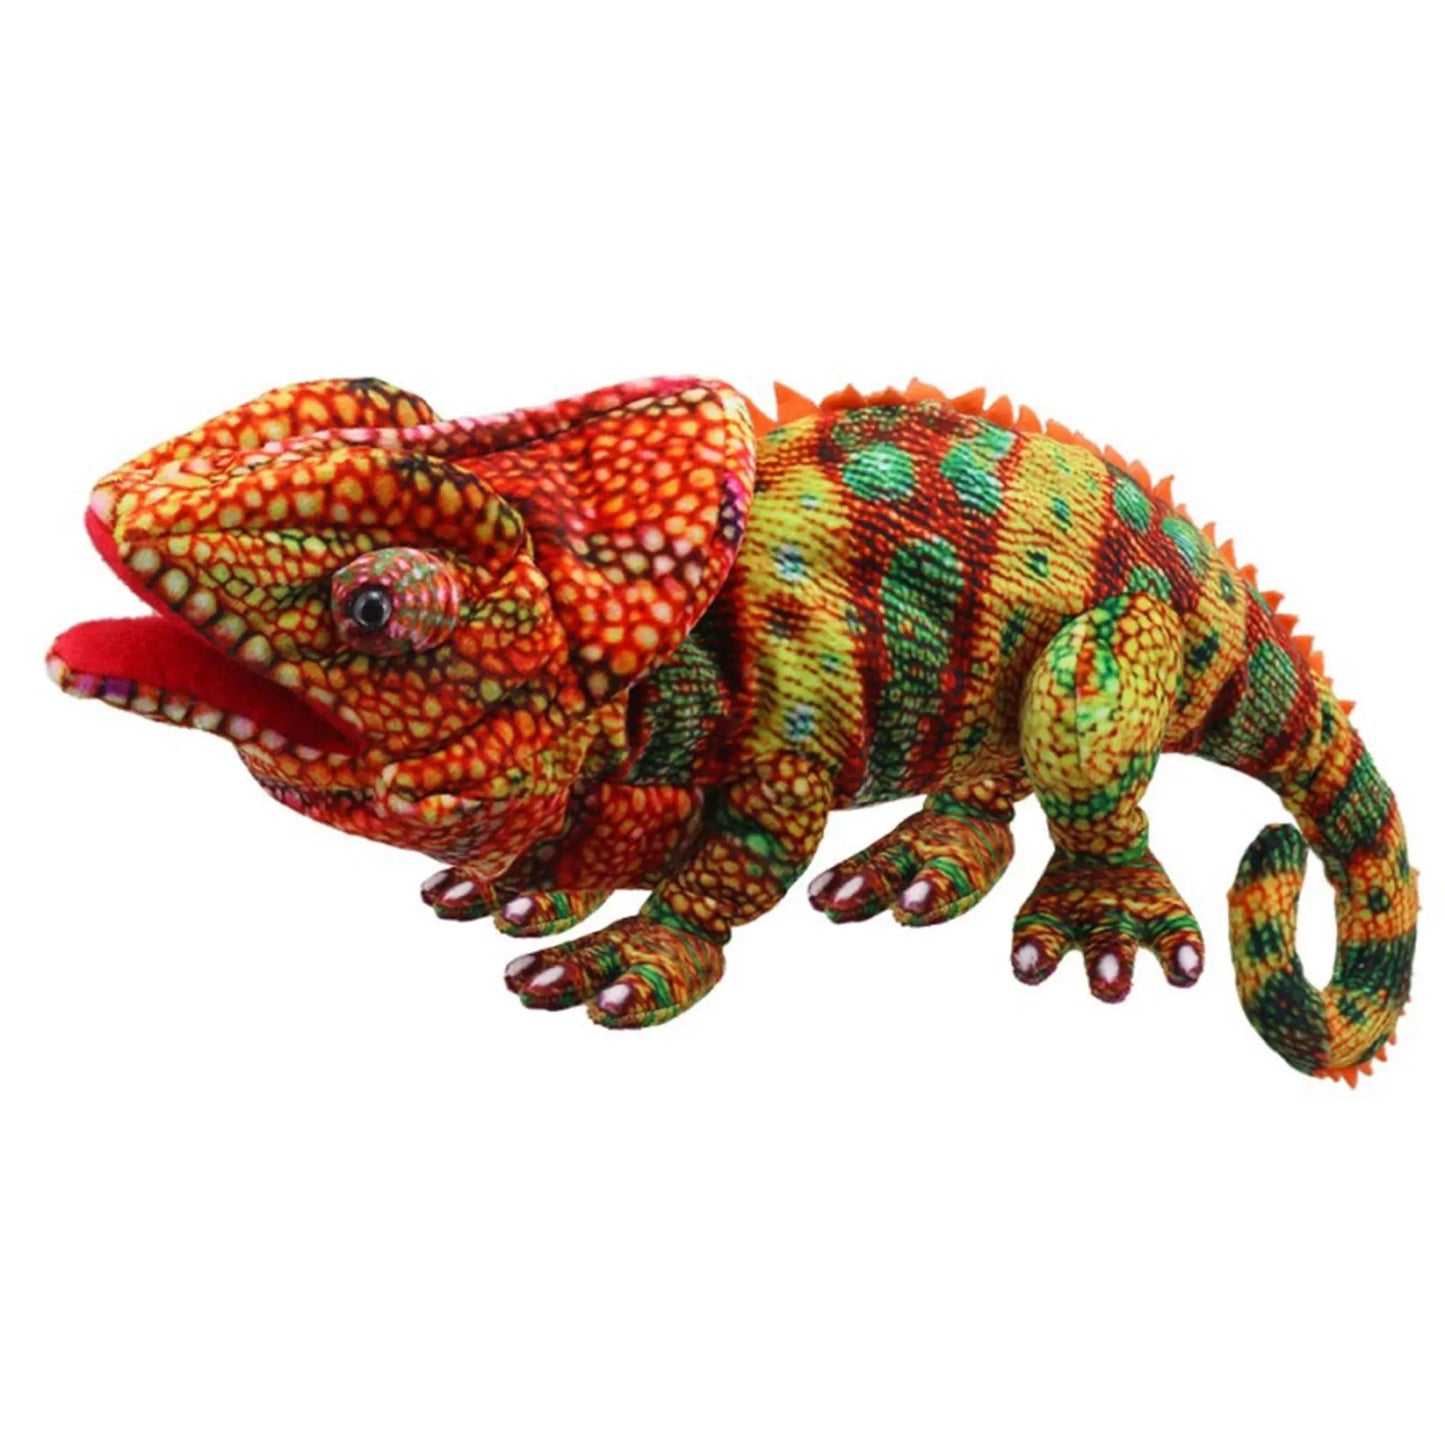 Chameleon (Orange) - Large Creatures Puppet - The Puppet Company - The Forgotten Toy Shop